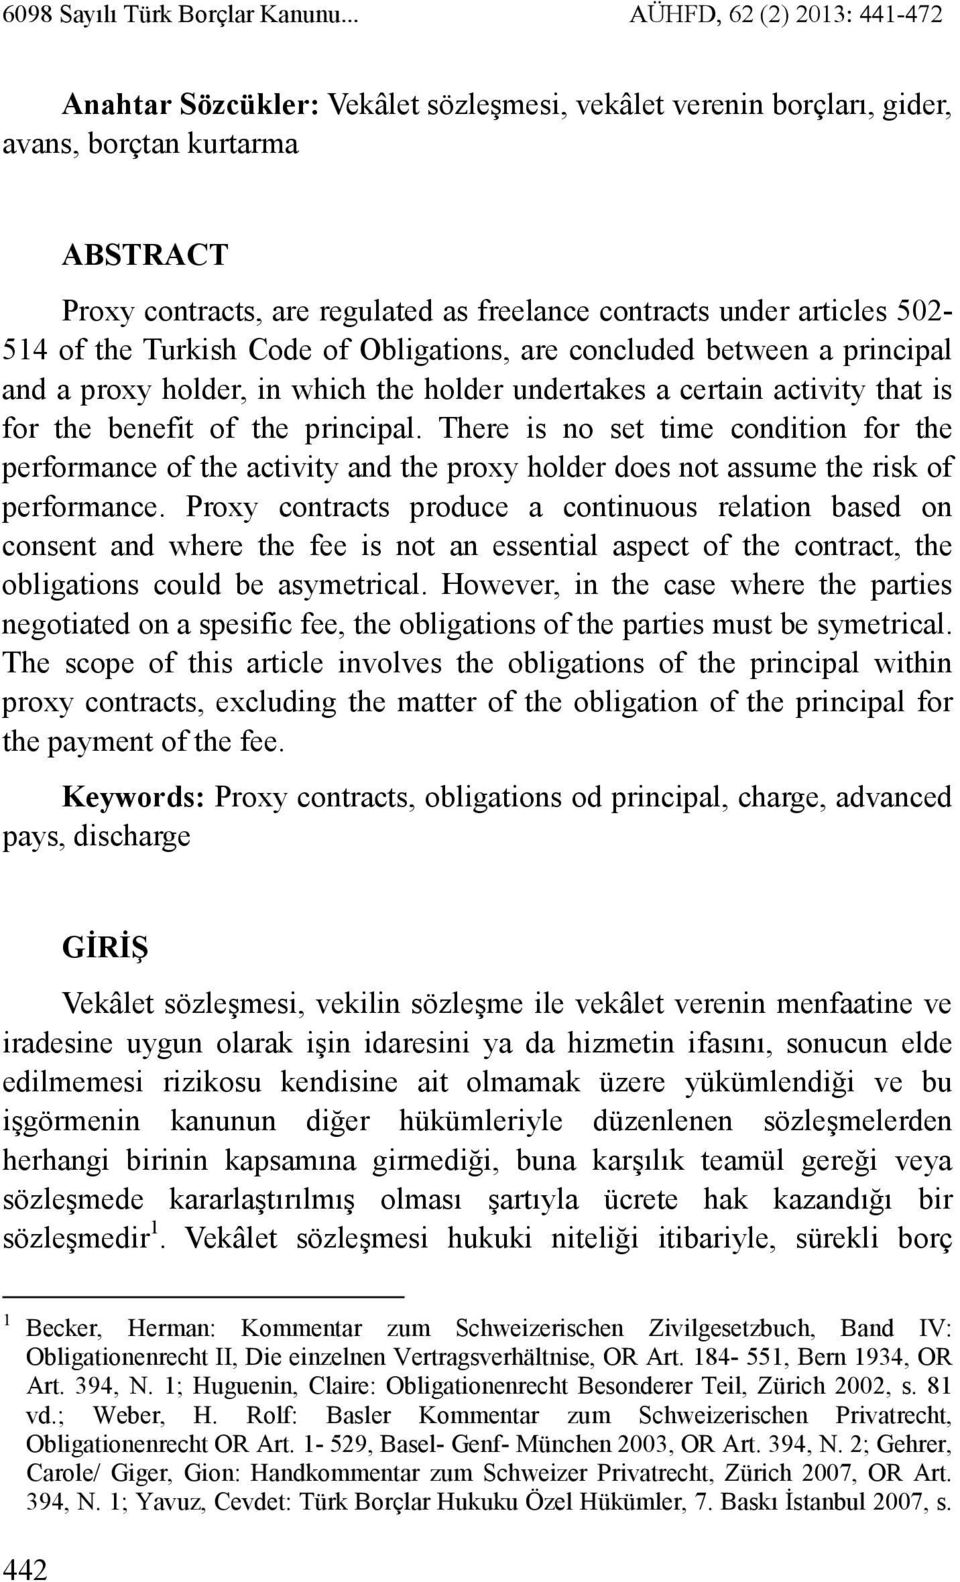 articles 502-514 of the Turkish Code of Obligations, are concluded between a principal and a proxy holder, in which the holder undertakes a certain activity that is for the benefit of the principal.